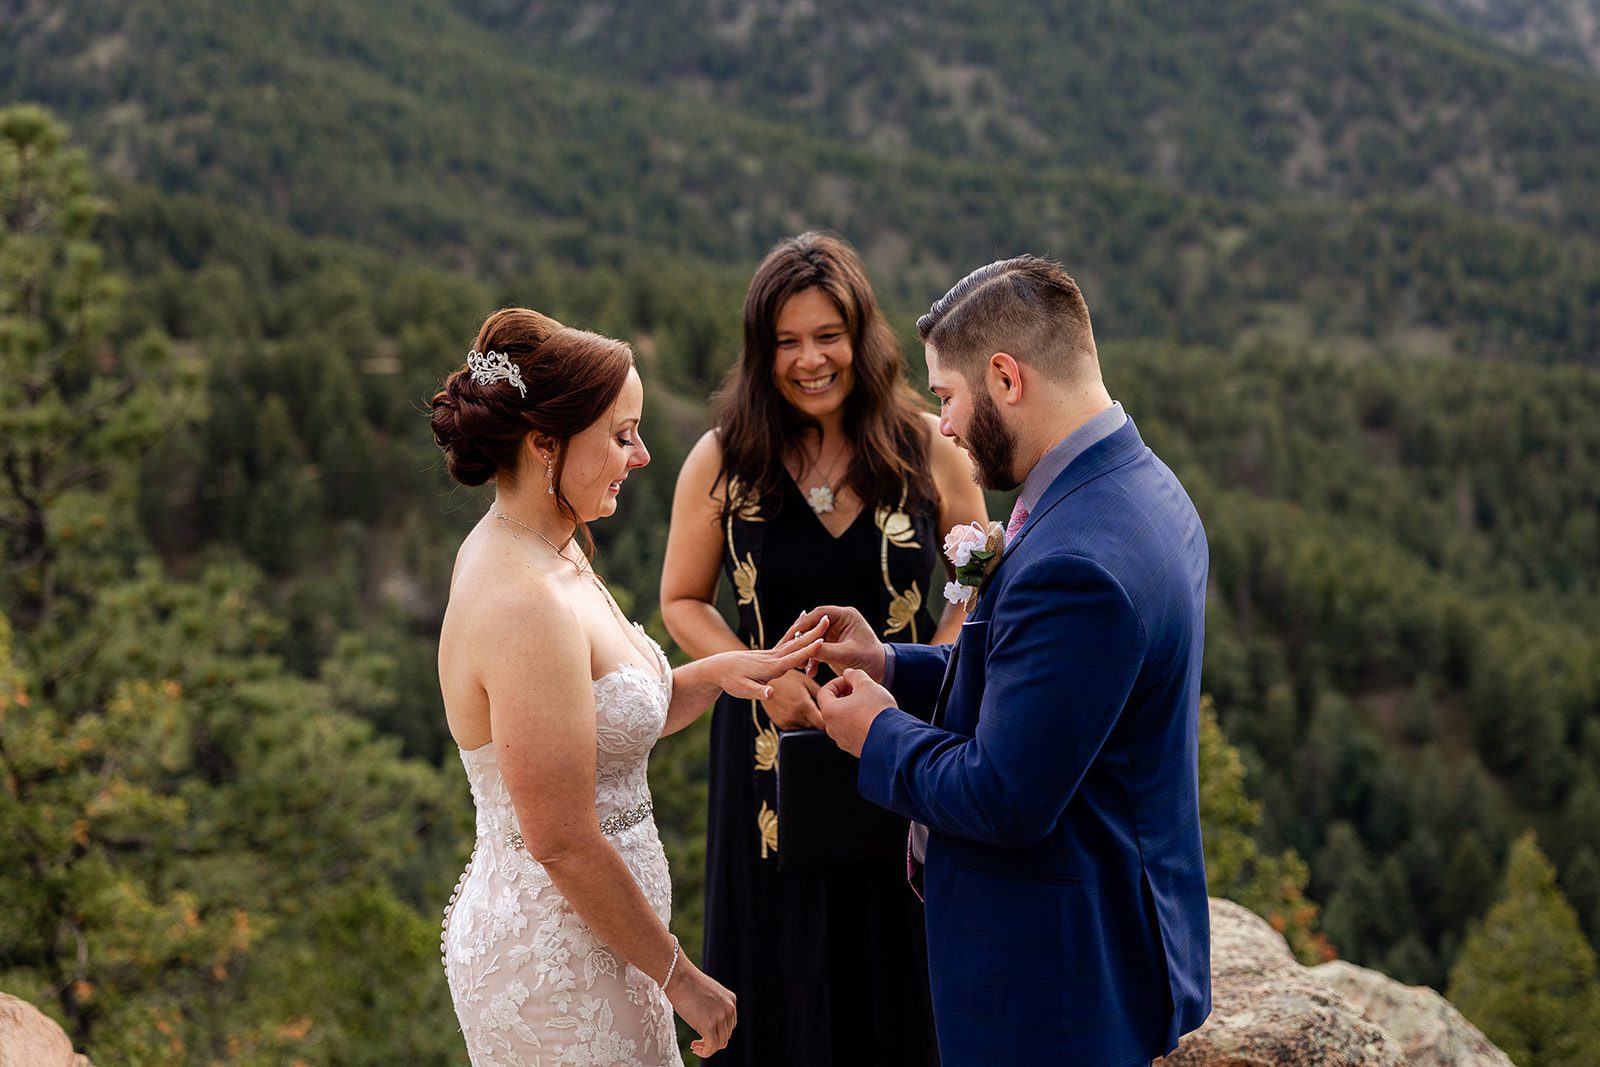 Groom puts the ring on his brides hand during their ceremony at  their Boulder elopement with videography.